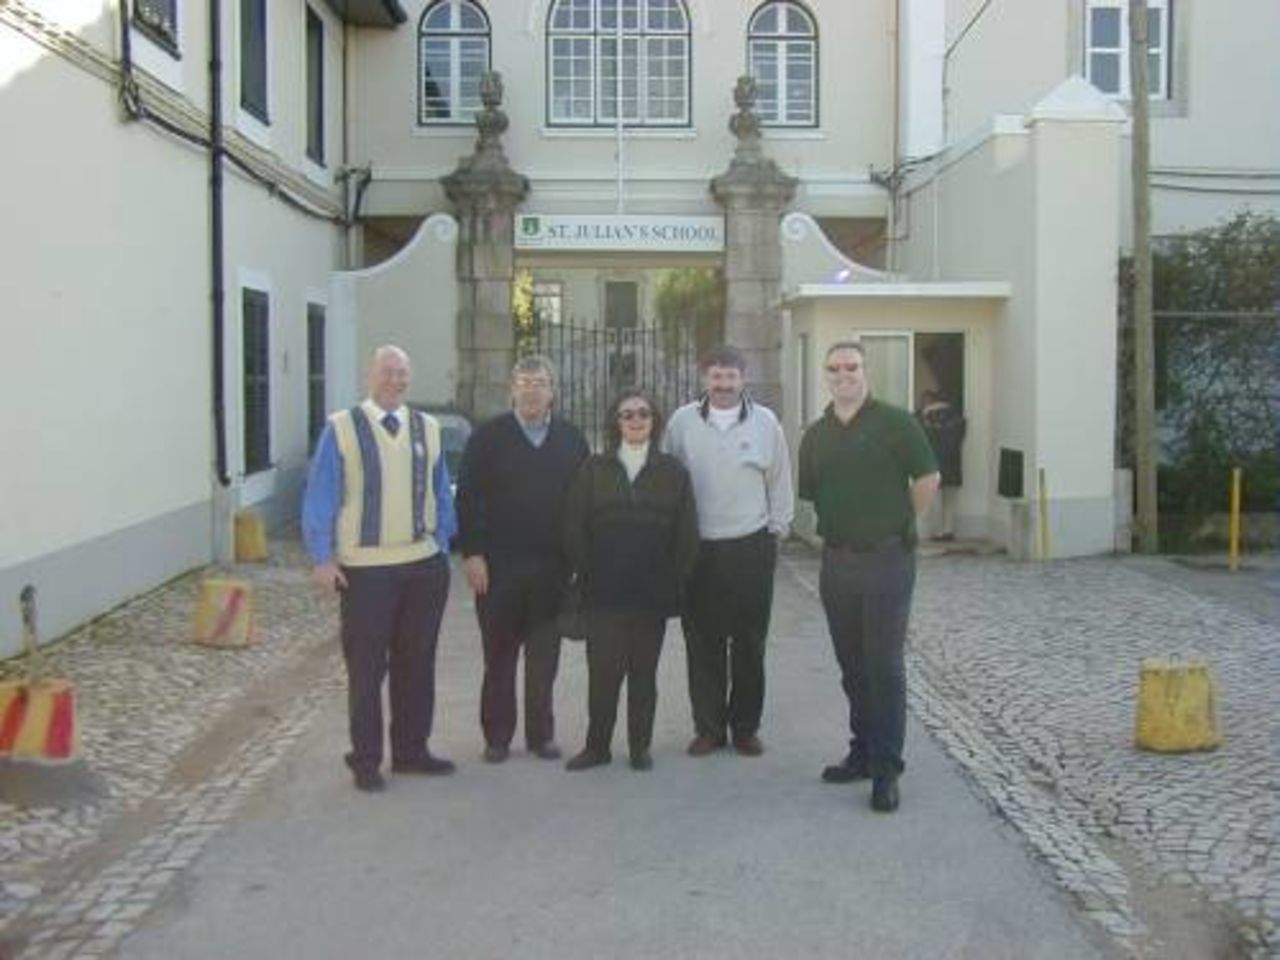 Richard O'Sullivan (far right) during a reconnaissance visit to Portugal